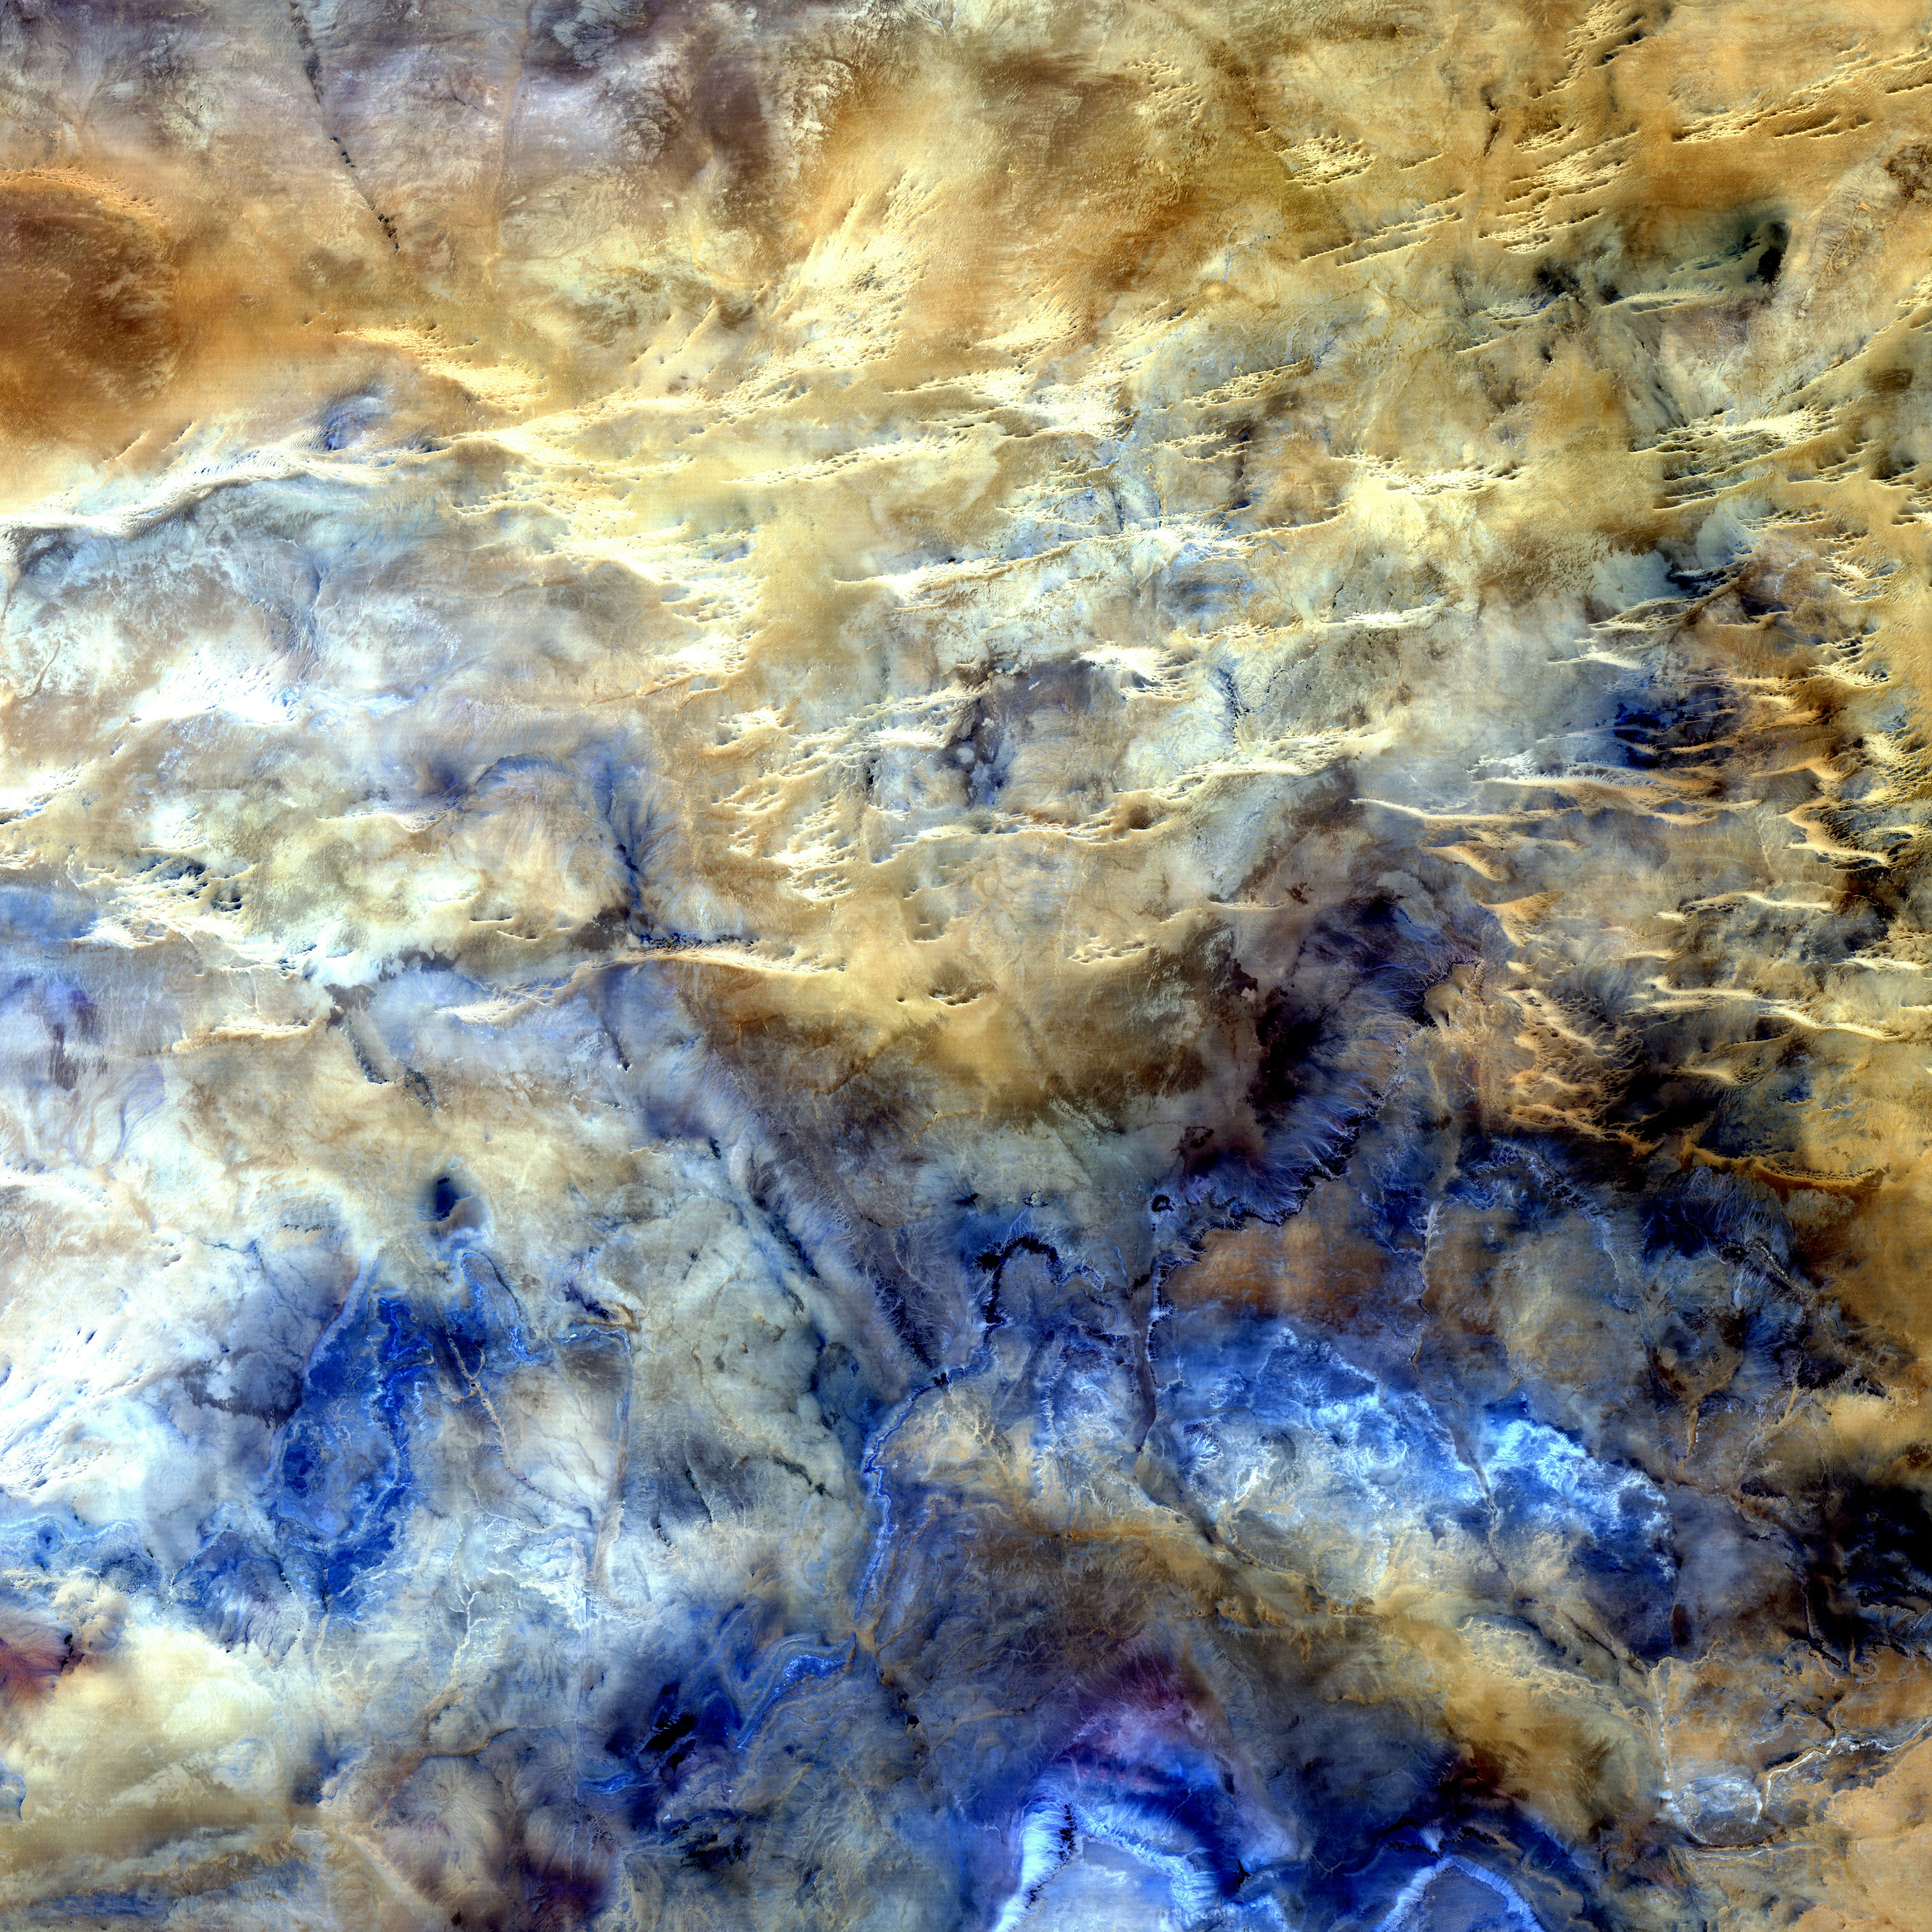 A study in shades of blue and brown is actually one of the harshest landscapes on Earth. This glimpse of Africa's Sahara Desert, located near where the borders of Mali, Niger, and Algeria converge, is truly a no man's land, a world of sand and rock without roads or settlements. The horizontal lines across the top half of the image are intrusions of igneous rock, where magma poked up to the surface from deep underground.